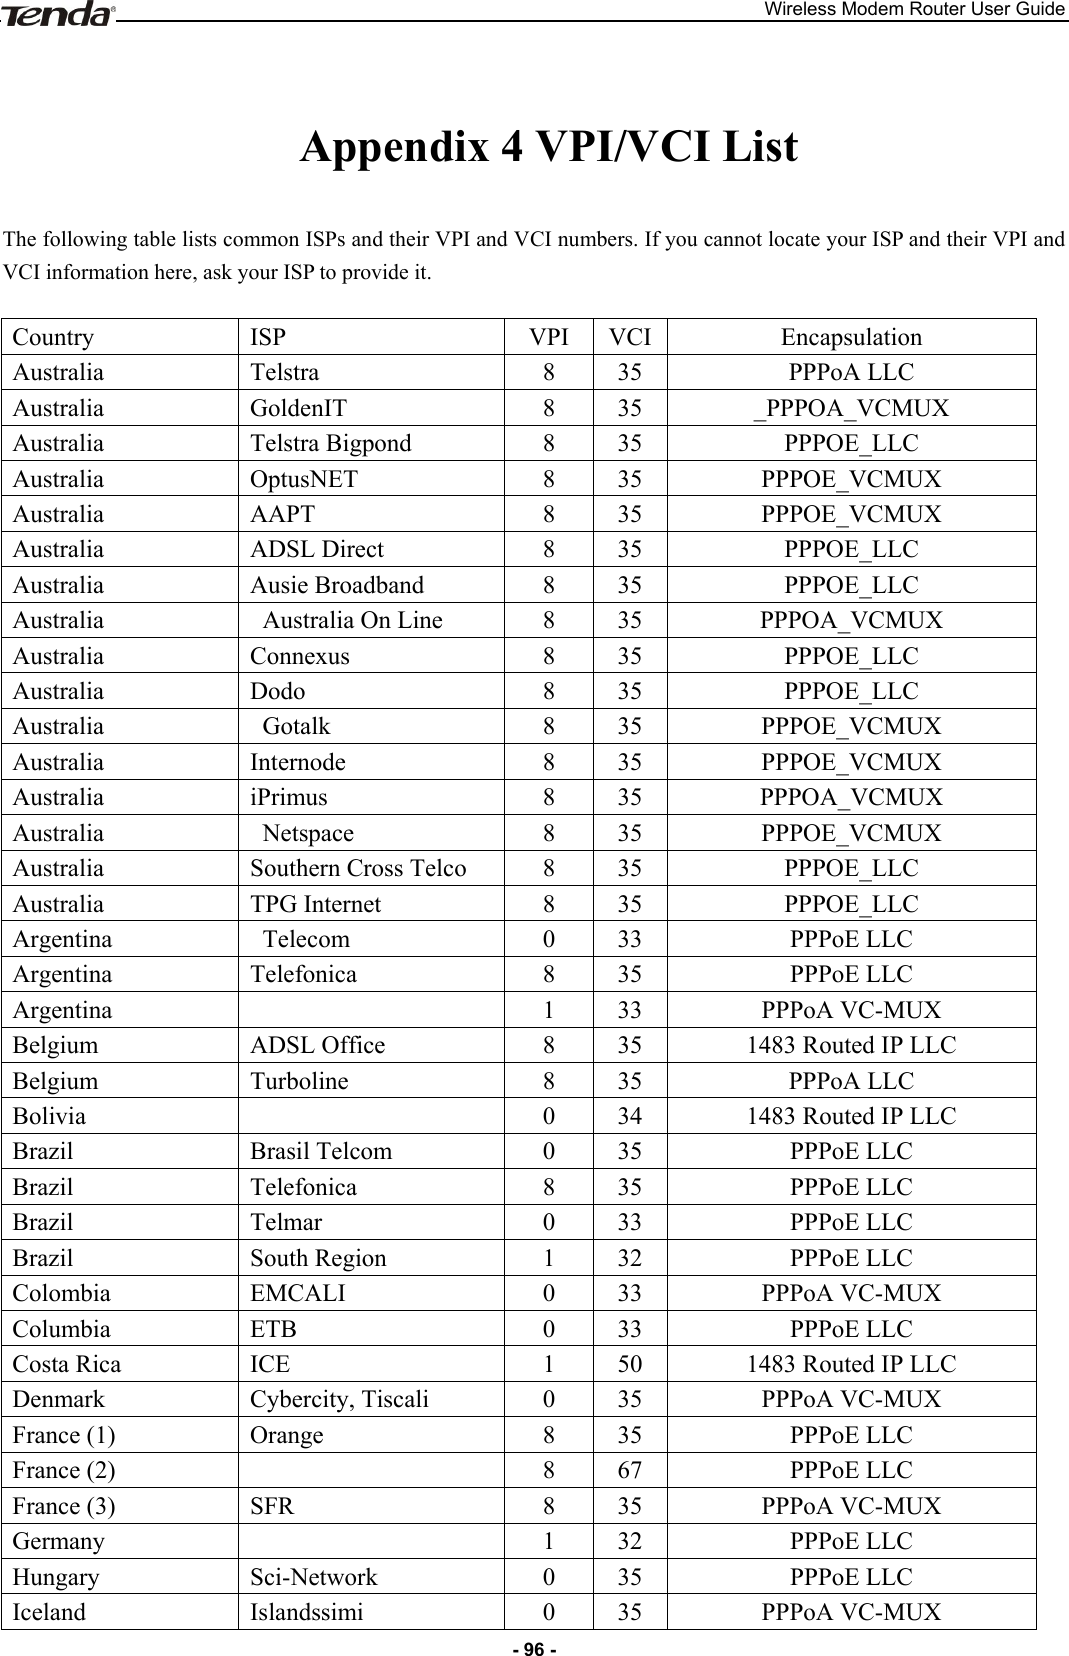 Wireless Modem Router User Guide - 96 -  Appendix 4 VPI/VCI List The following table lists common ISPs and their VPI and VCI numbers. If you cannot locate your ISP and their VPI and VCI information here, ask your ISP to provide it.  Country ISP   VPI VCI Encapsulation Australia Telstra 8 35 PPPoA LLC Australia   GoldenIT 8 35 _PPPOA_VCMUX Australia   Telstra Bigpond 8 35 PPPOE_LLC Australia OptusNET 8 35 PPPOE_VCMUX Australia   AAPT 8 35 PPPOE_VCMUX Australia   ADSL Direct 8 35 PPPOE_LLC Australia   Ausie Broadband 8 35 PPPOE_LLC Australia     Australia On Line 8 35 PPPOA_VCMUX Australia   Connexus 8 35 PPPOE_LLC Australia   Dodo 8 35 PPPOE_LLC Australia   Gotalk 8 35 PPPOE_VCMUX Australia   Internode 8 35 PPPOE_VCMUX Australia   iPrimus 8 35 PPPOA_VCMUX Australia     Netspace 8 35 PPPOE_VCMUX Australia   Southern Cross Telco 8 35 PPPOE_LLC Australia   TPG Internet 8 35 PPPOE_LLC Argentina   Telecom 0 33 PPPoE LLC Argentina   Telefonica 8 35 PPPoE LLC Argentina   1 33 PPPoA VC-MUX Belgium ADSL Office 8 35 1483 Routed IP LLC Belgium Turboline 8 35 PPPoA LLC Bolivia   0 34 1483 Routed IP LLC Brazil   Brasil Telcom 0 35 PPPoE LLC Brazil   Telefonica 8 35 PPPoE LLC Brazil Telmar 0 33 PPPoE LLC Brazil   South Region 1 32 PPPoE LLC Colombia   EMCALI 0 33 PPPoA VC-MUX Columbia   ETB 0 33 PPPoE LLC Costa Rica ICE 1 50 1483 Routed IP LLC Denmark Cybercity, Tiscali 0 35 PPPoA VC-MUX France (1) Orange 8 35 PPPoE LLC France (2)   8 67 PPPoE LLC France (3) SFR 8 35 PPPoA VC-MUX Germany   1 32 PPPoE LLC Hungary   Sci-Network 0 35 PPPoE LLC Iceland Islandssimi 0 35 PPPoA VC-MUX 